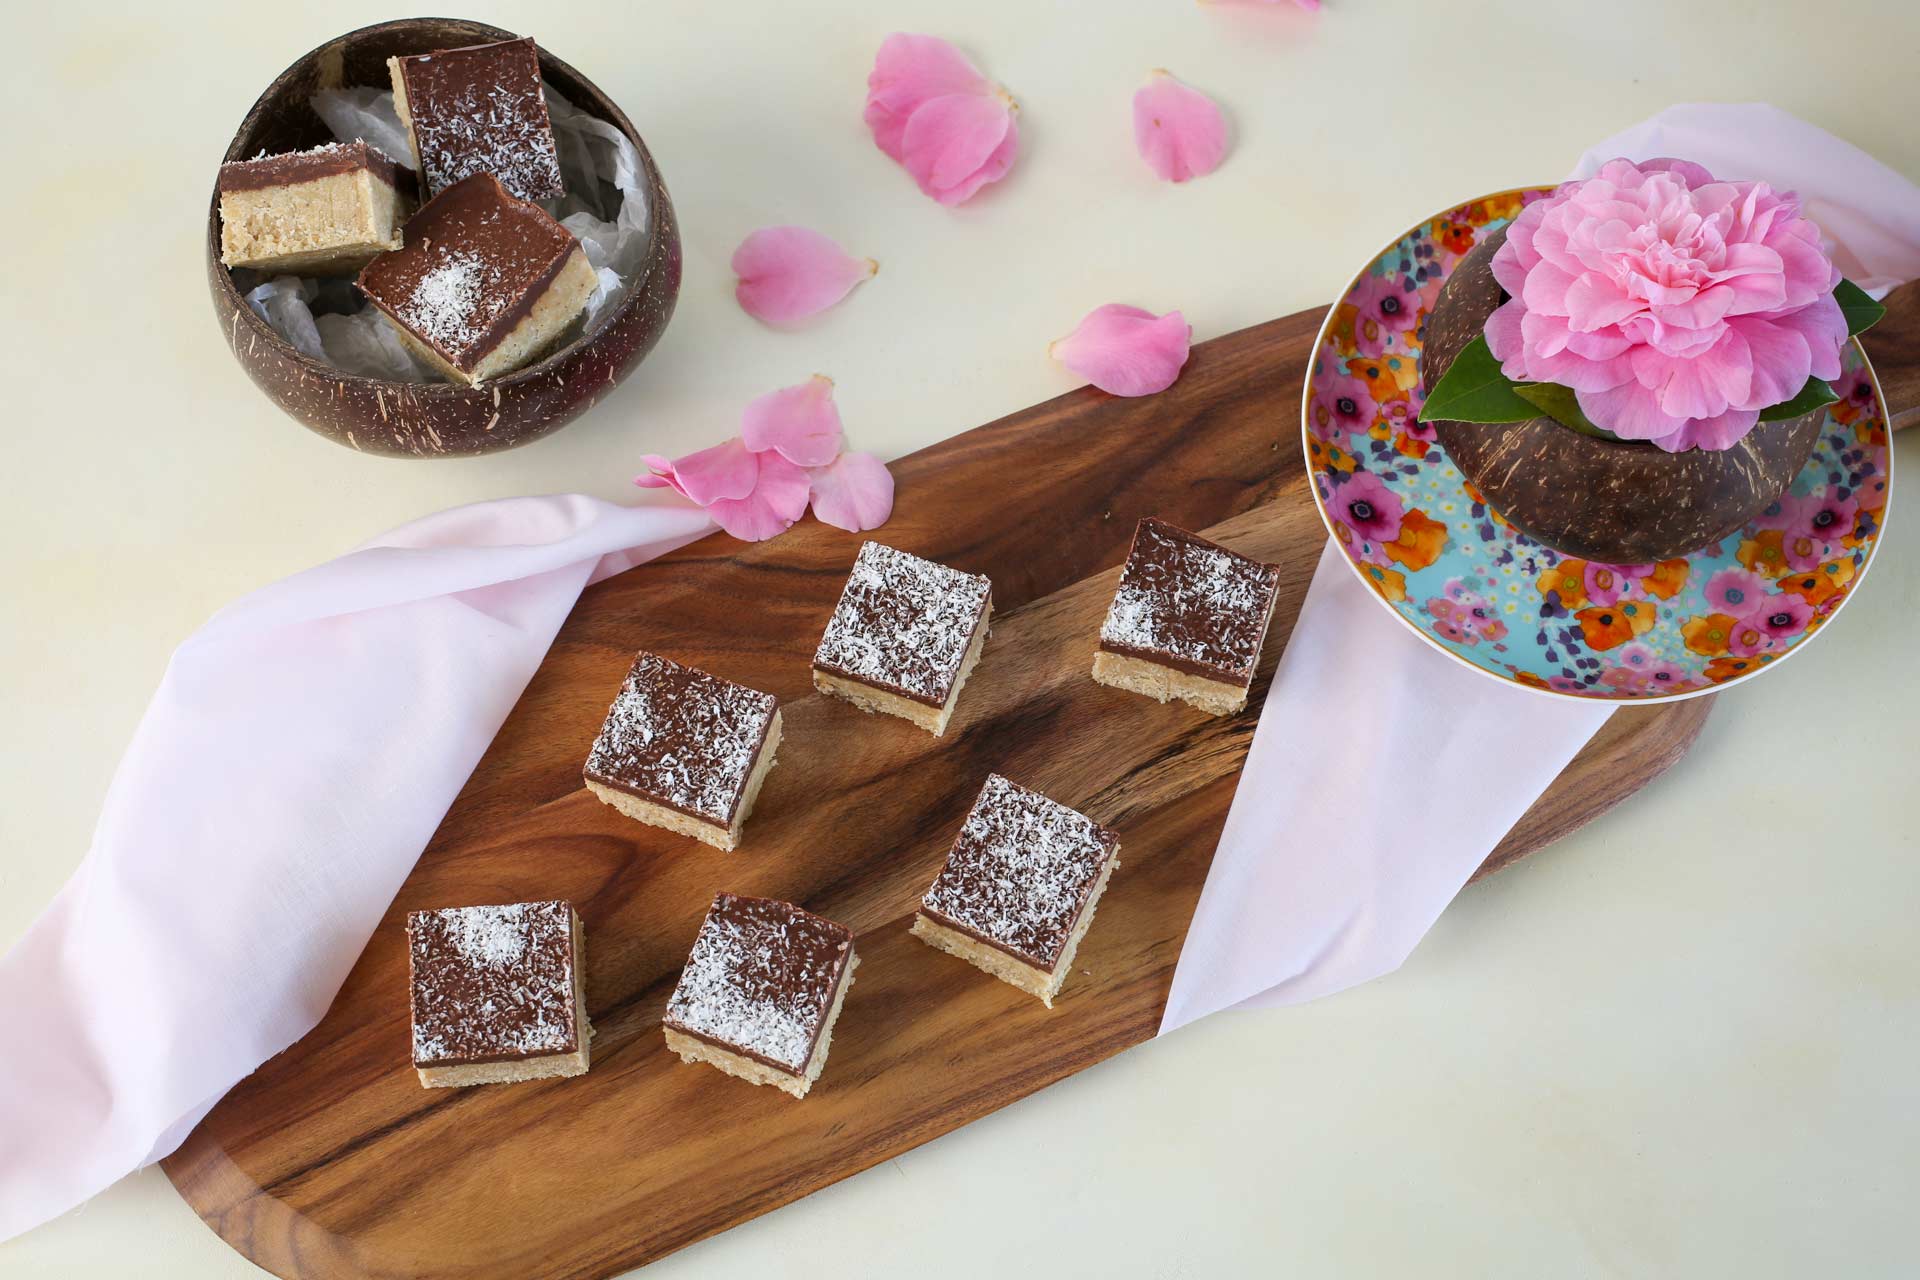 A raw slice version of a bounty bar made of coconut and chocolate on a platter